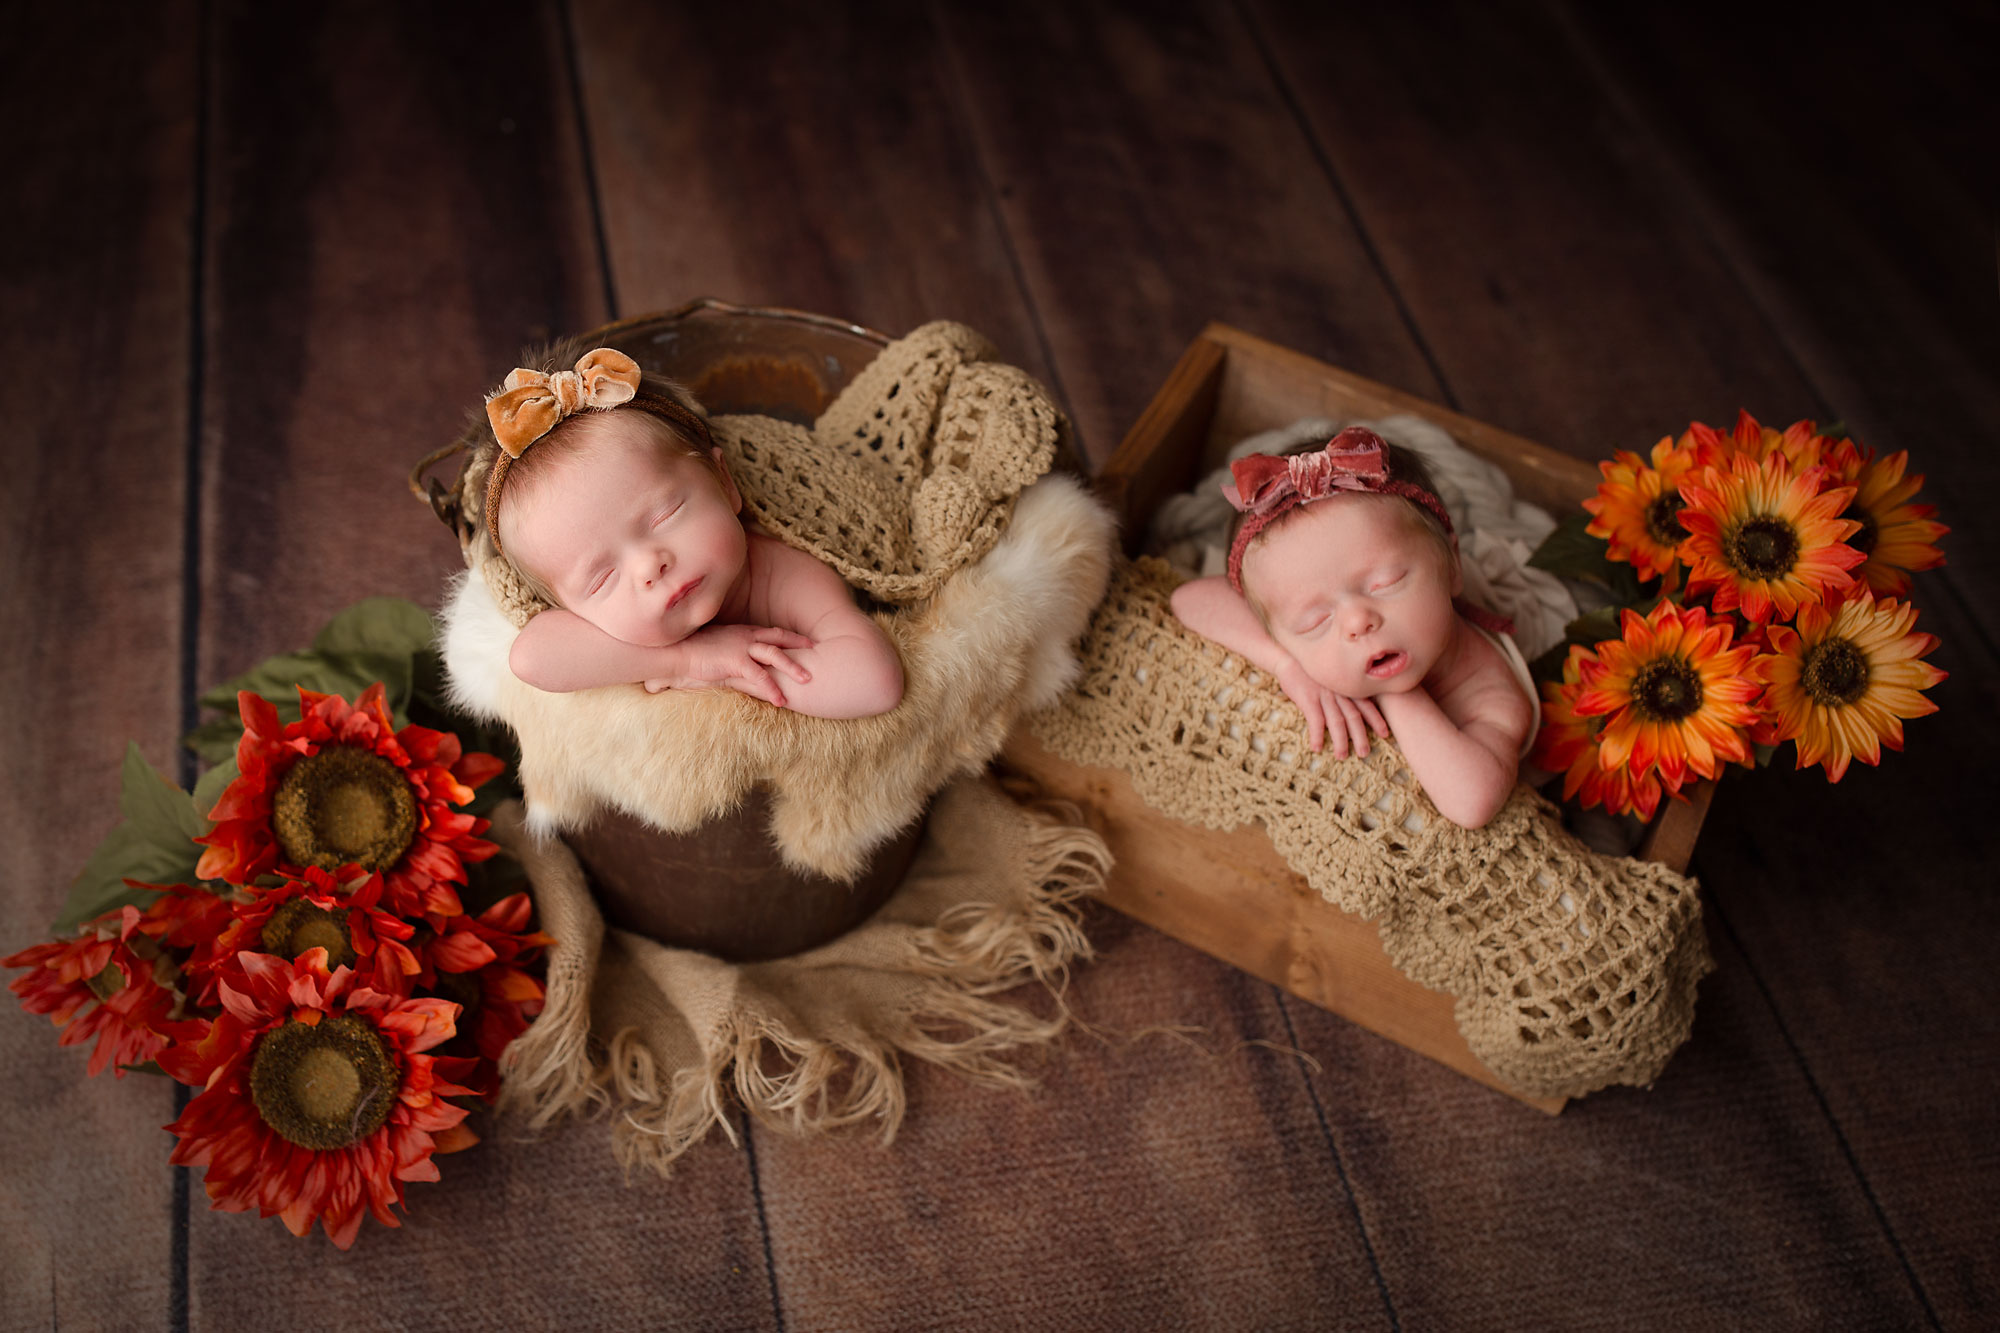 twin baby images, twin girls asleep in rustic fall setup with bucket, wood box, and flowers